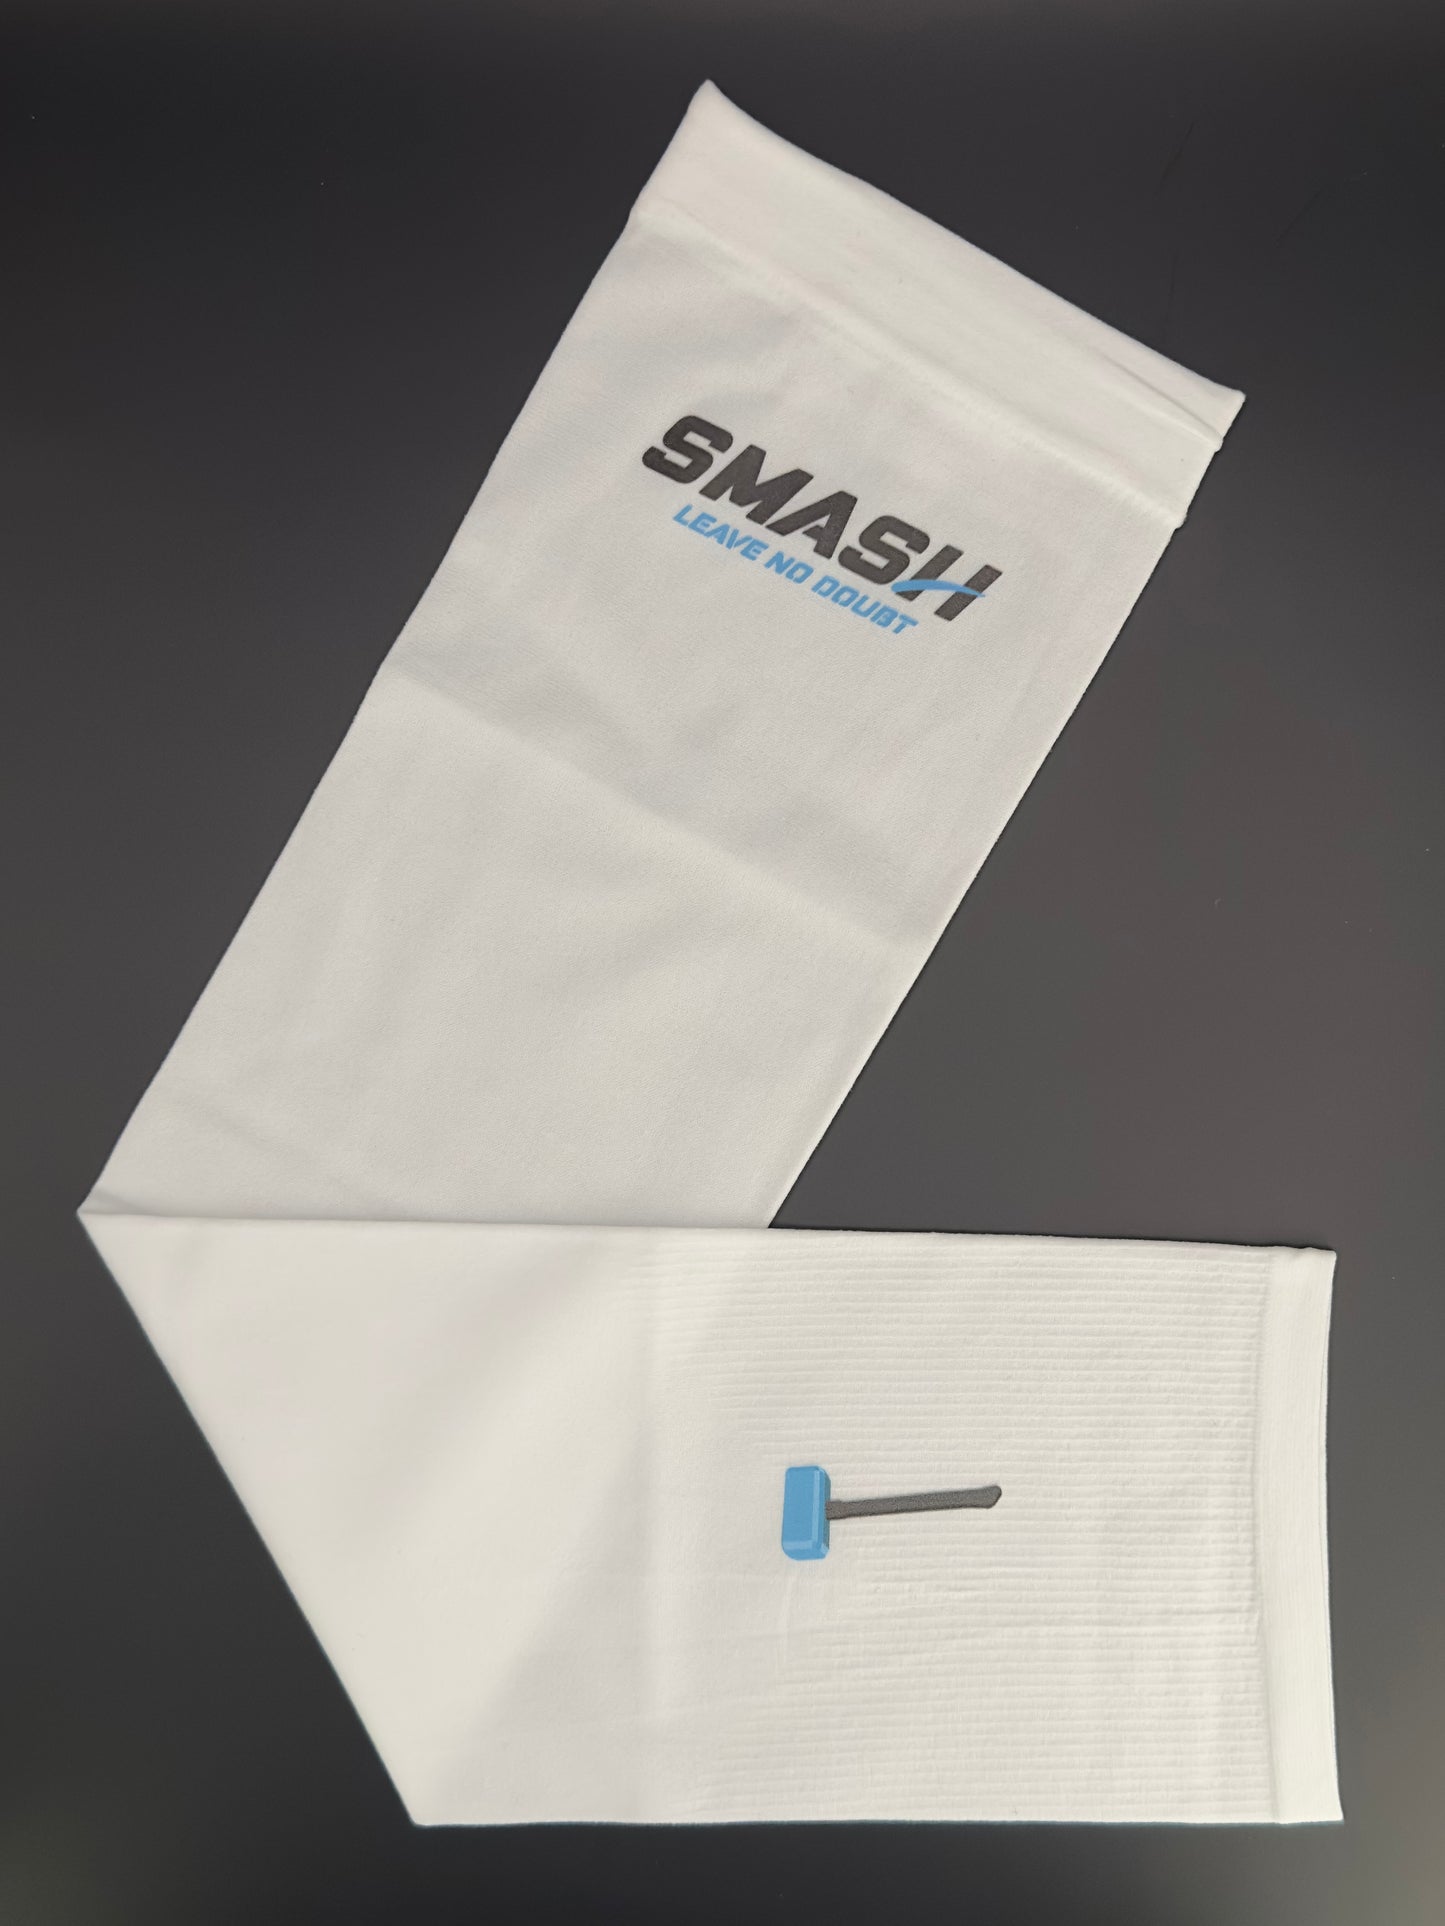 SMASH Pro Compression Arm Sleeves - Hammer Collection